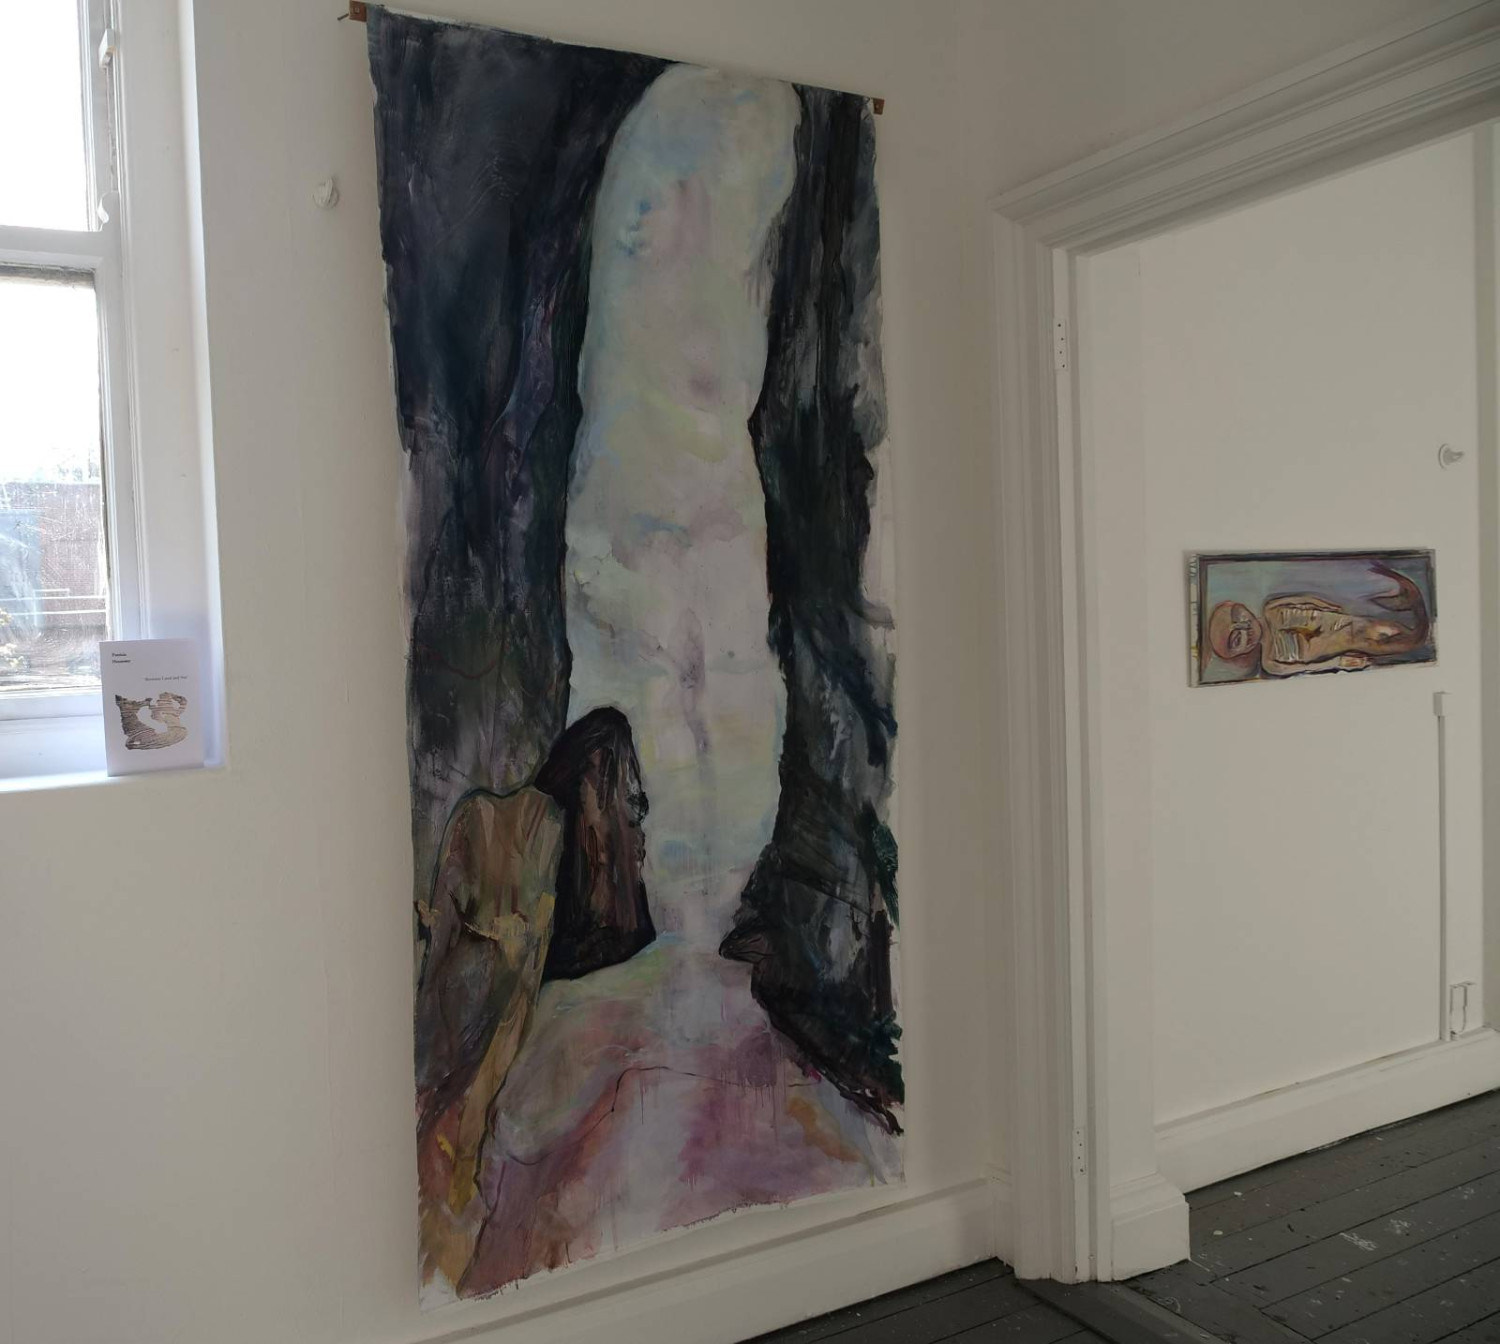 Installation view: *Inside and Outside*, oil on canvas; *A Curiosity (after Karukayado Temple Mermaid)*, oil on canvas